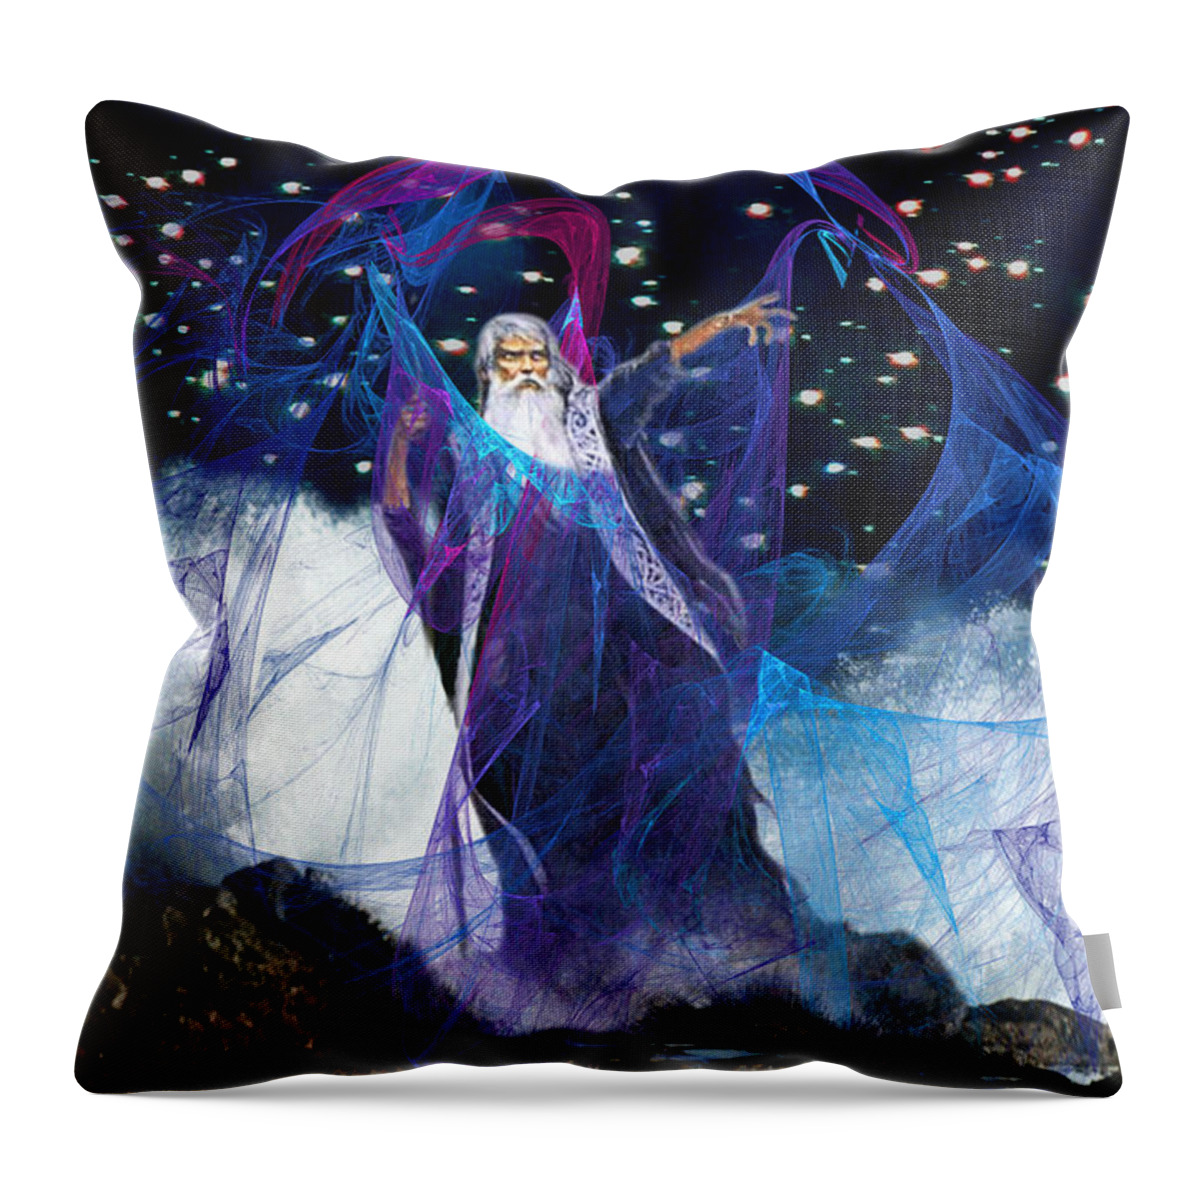 Sea Throw Pillow featuring the digital art Sea Wizard by Lisa Yount